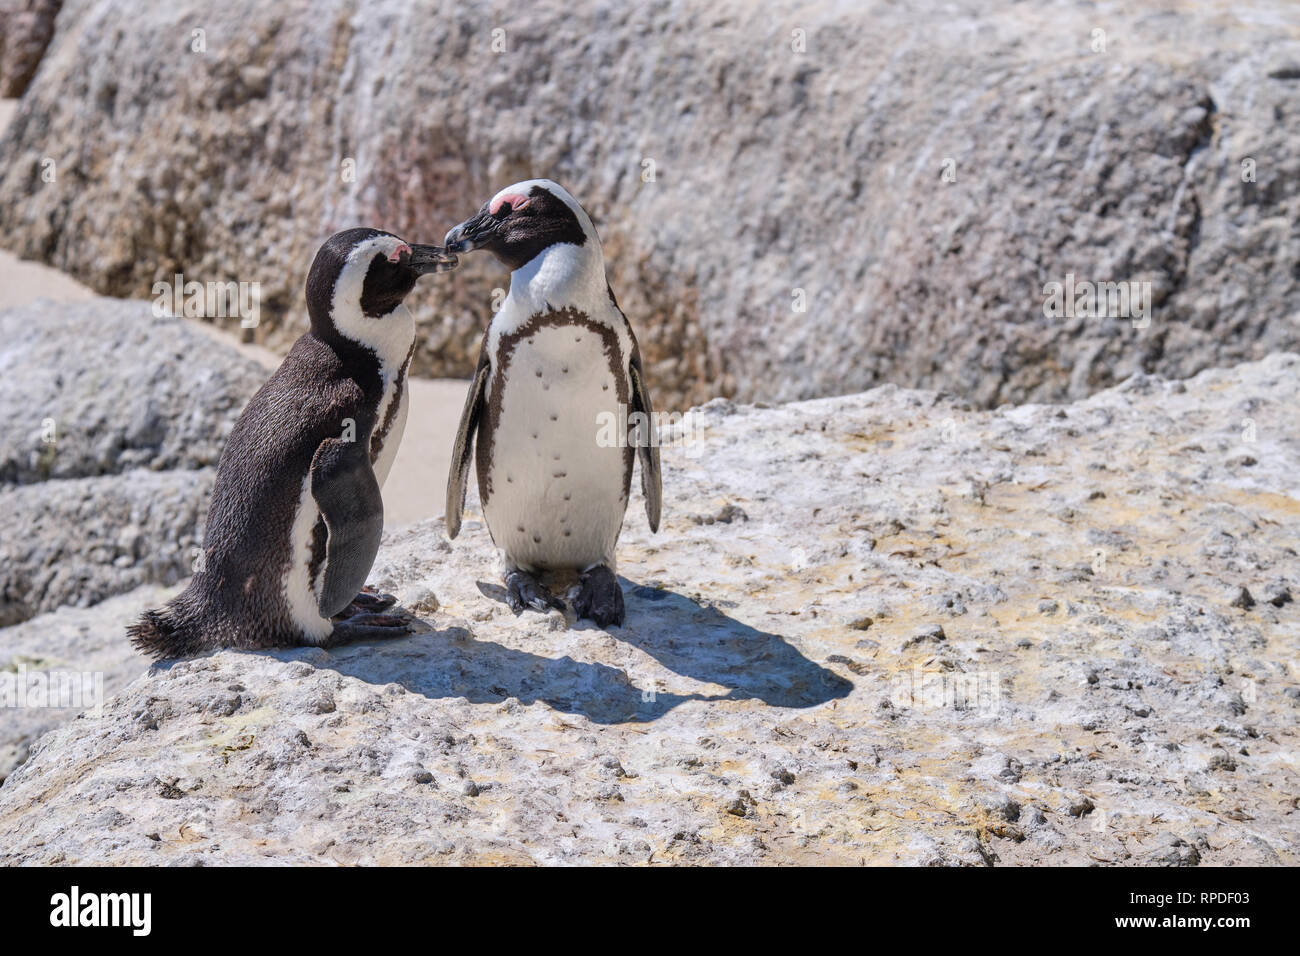 Pair of African penguin on a large rock with affection display. Beak to beak contact Stock Photo